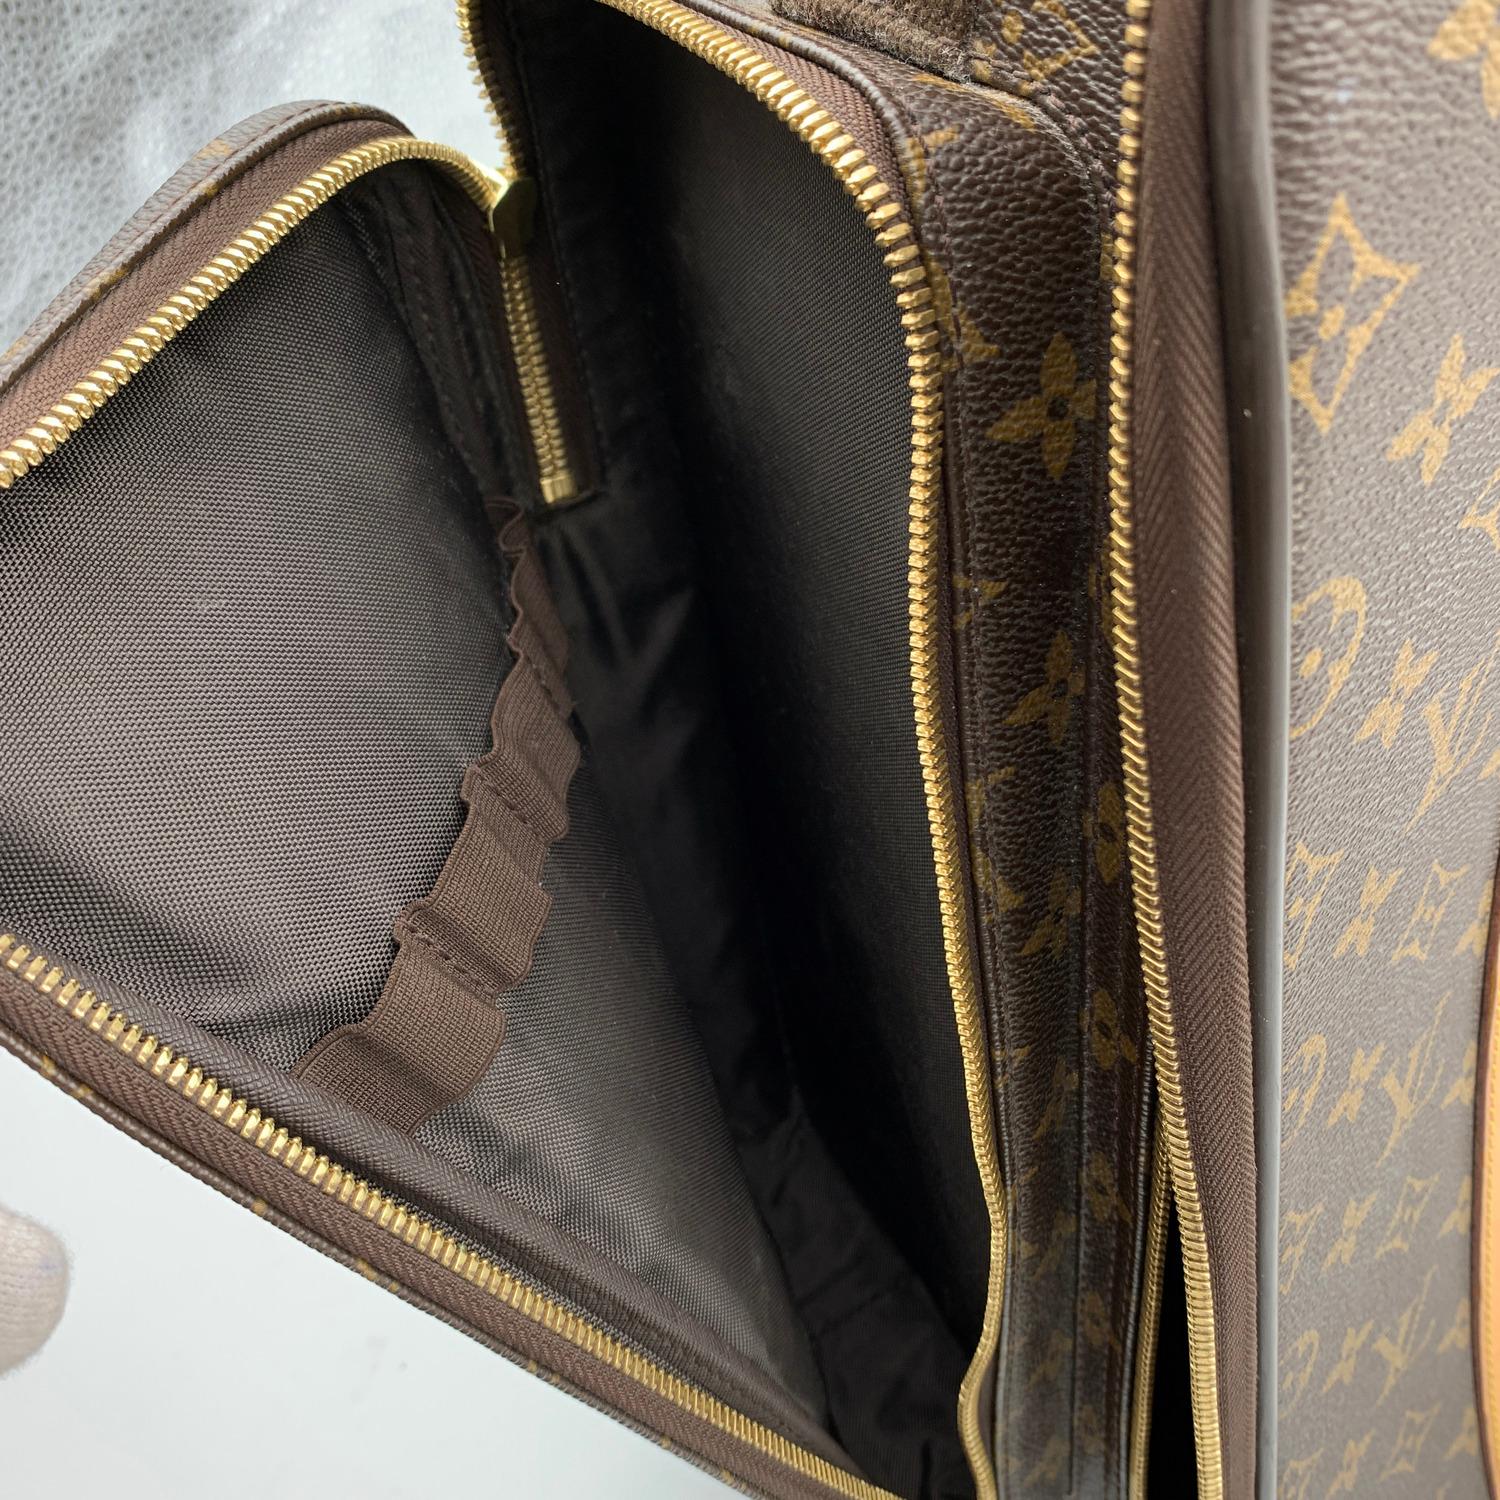 Gorgeous Louis Vuitton Bosphore 50 Roller Luggage. This sophisticated and practical suitcase is crafted in classic monogram canvas and tan leather trim. It features 2 zippered exterior front pockets and 1 side zip pocket, that are easily accessible.